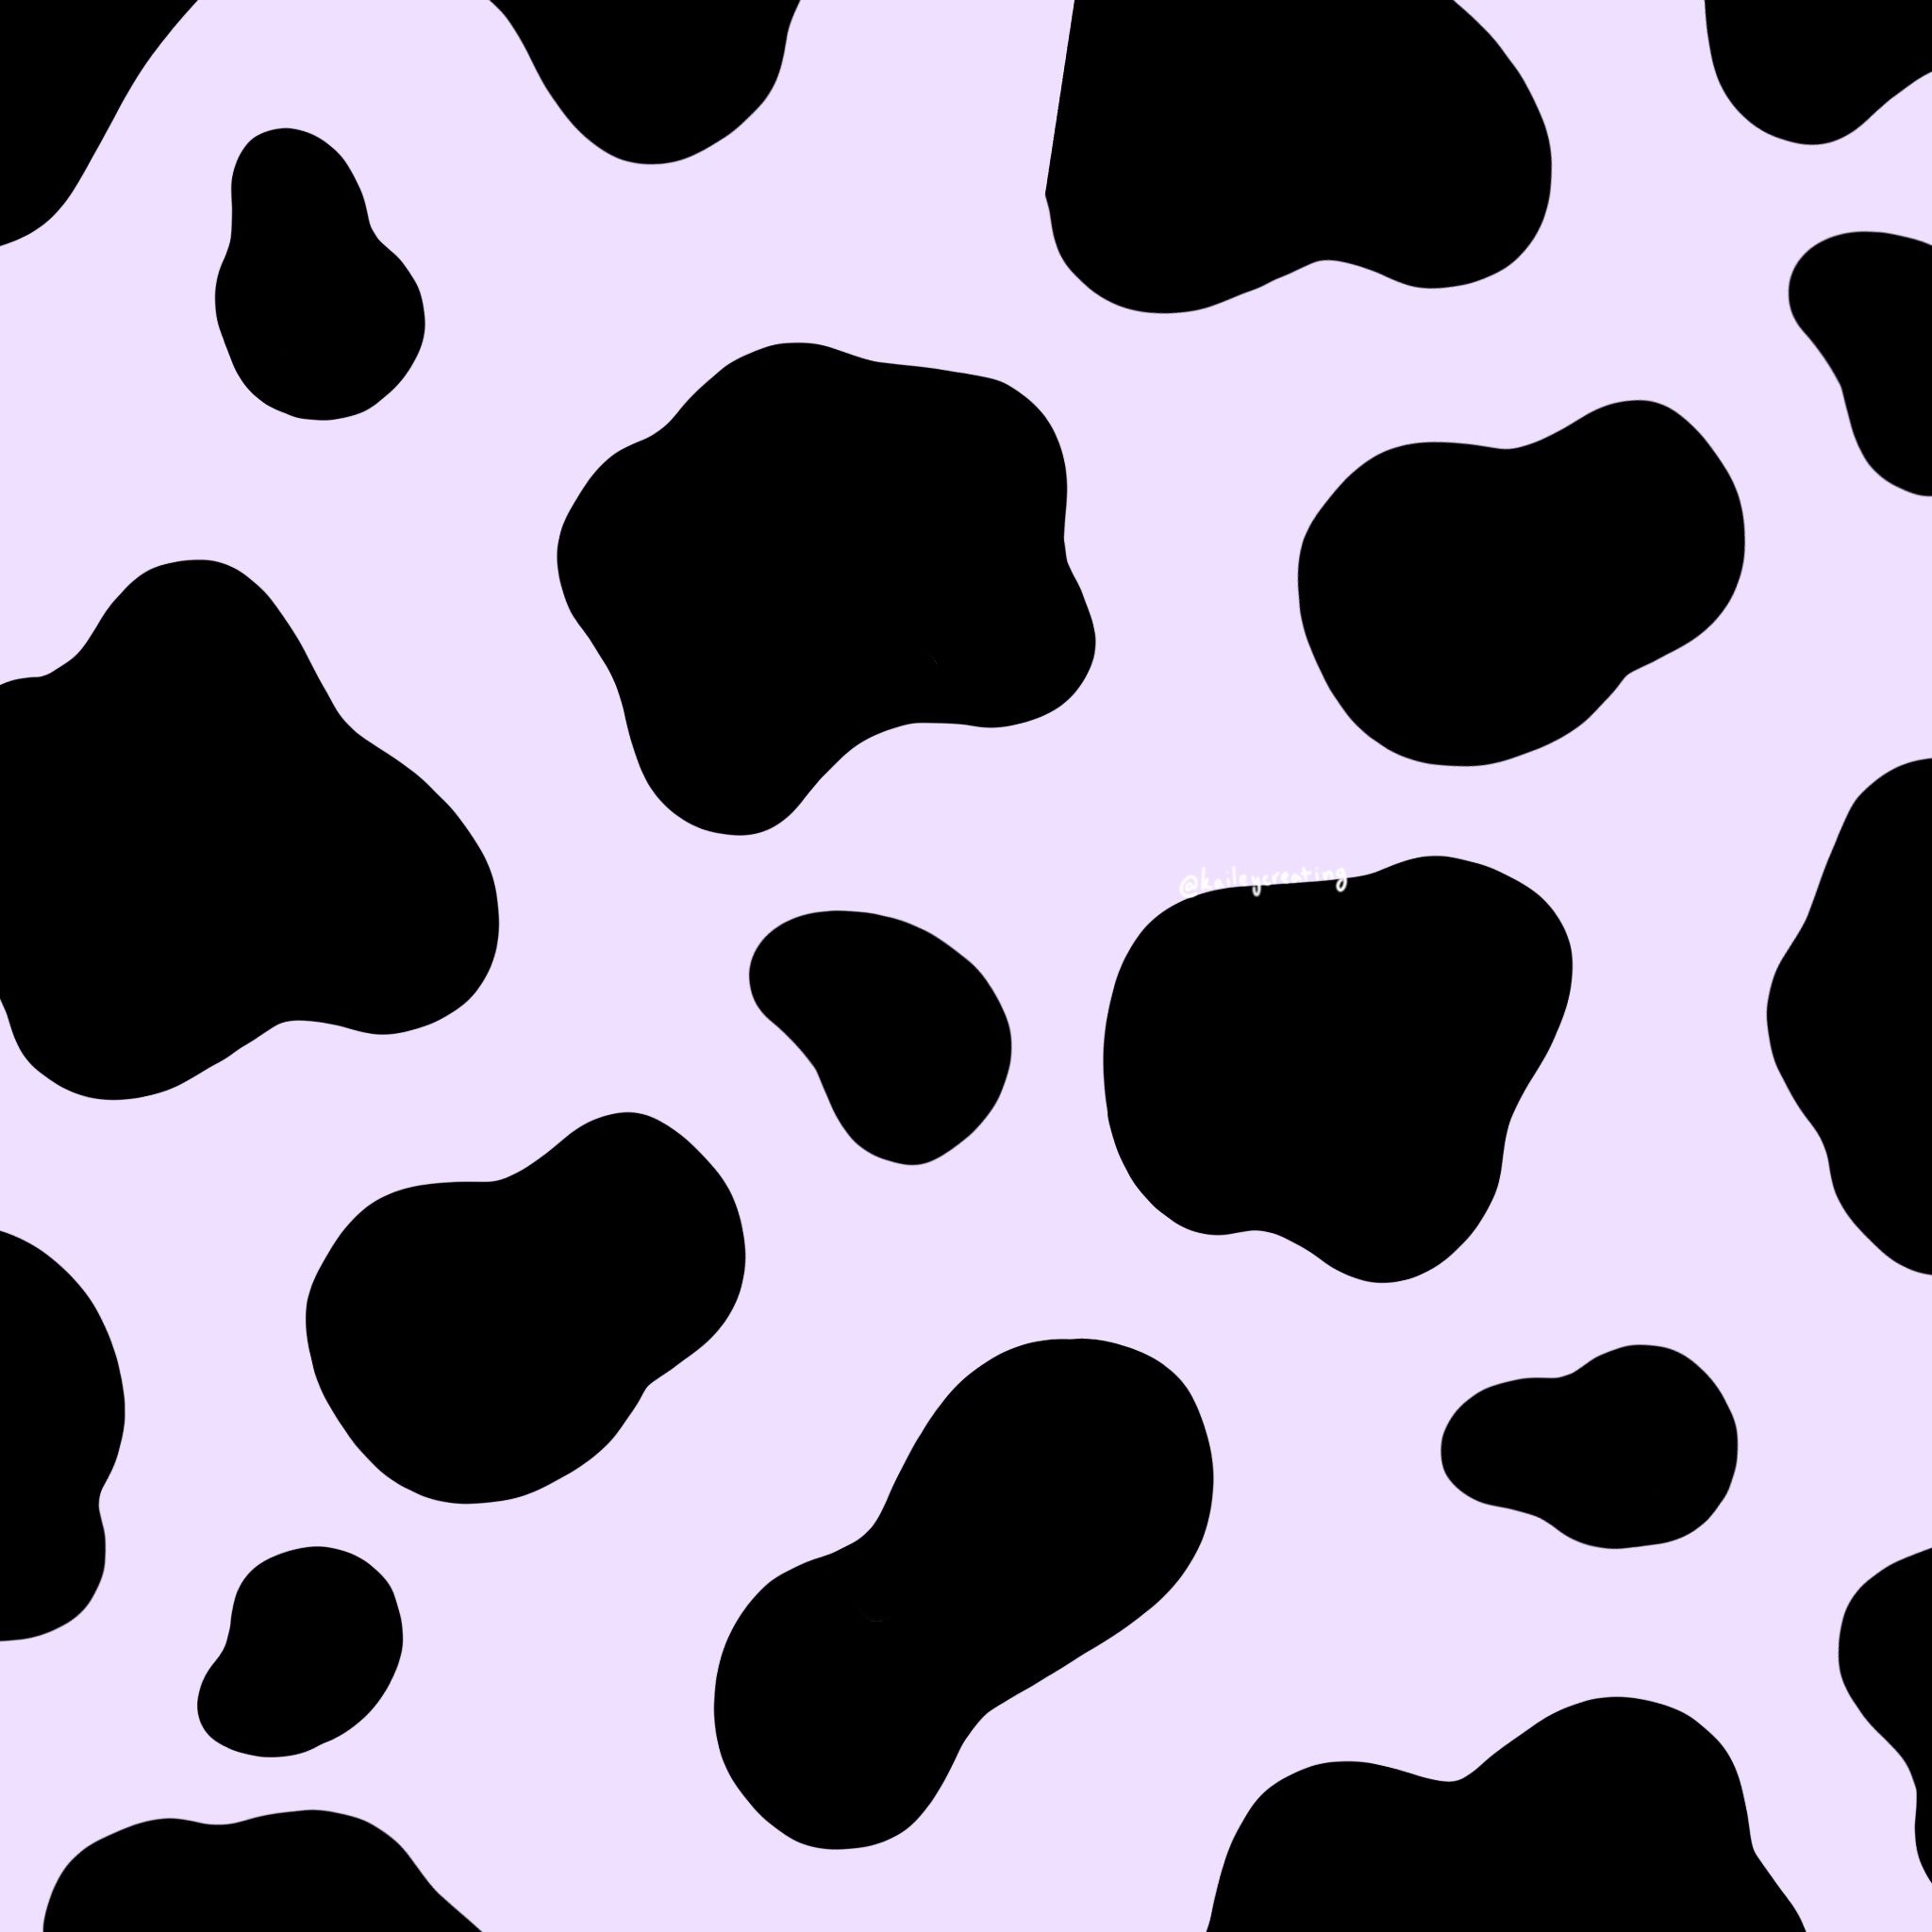 Cow print Wallpapers Download